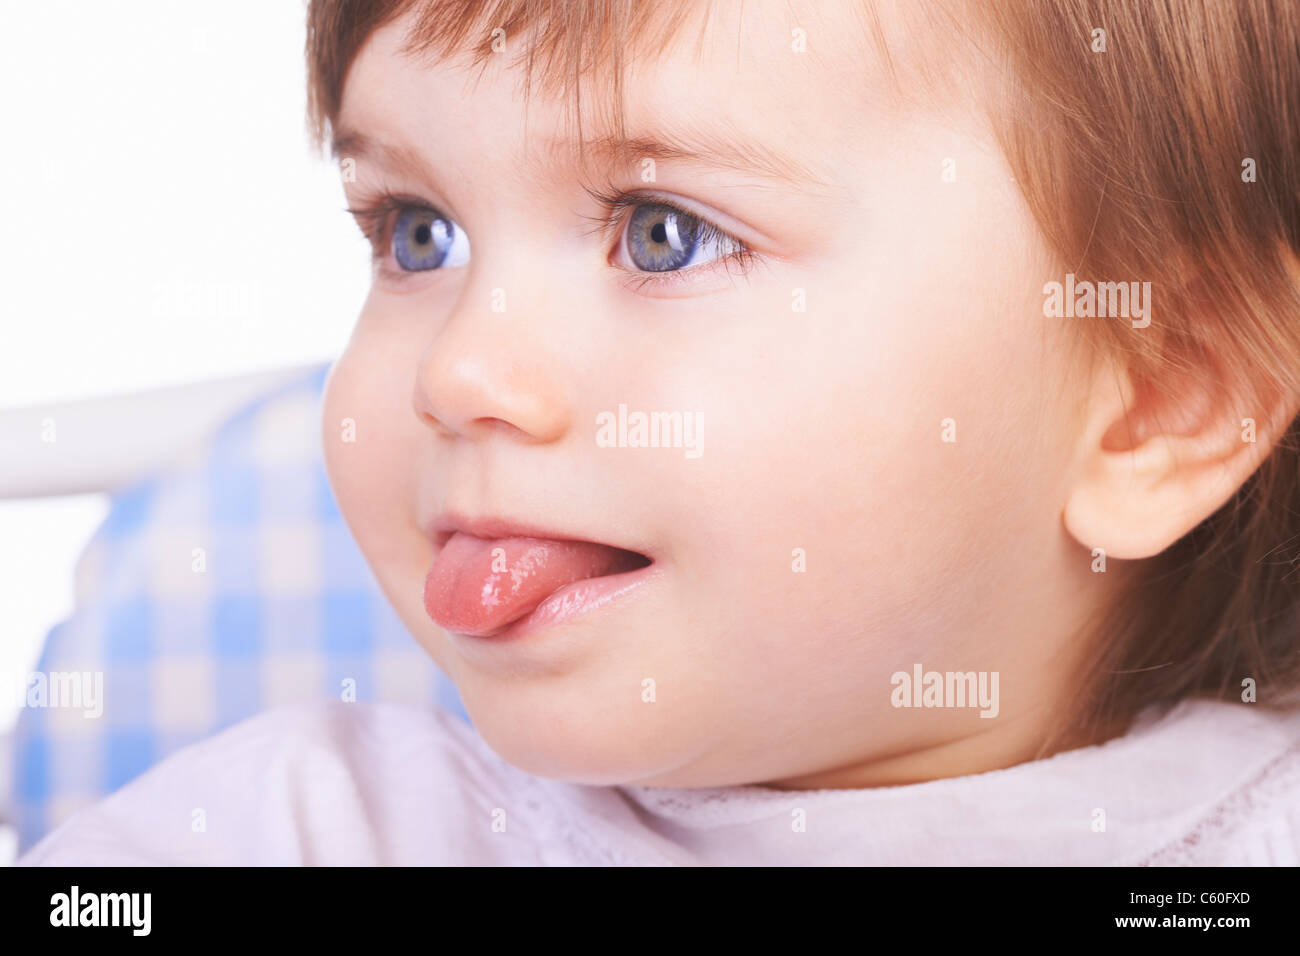 Baby girl sticking out her tongue Stock Photo - Alamy